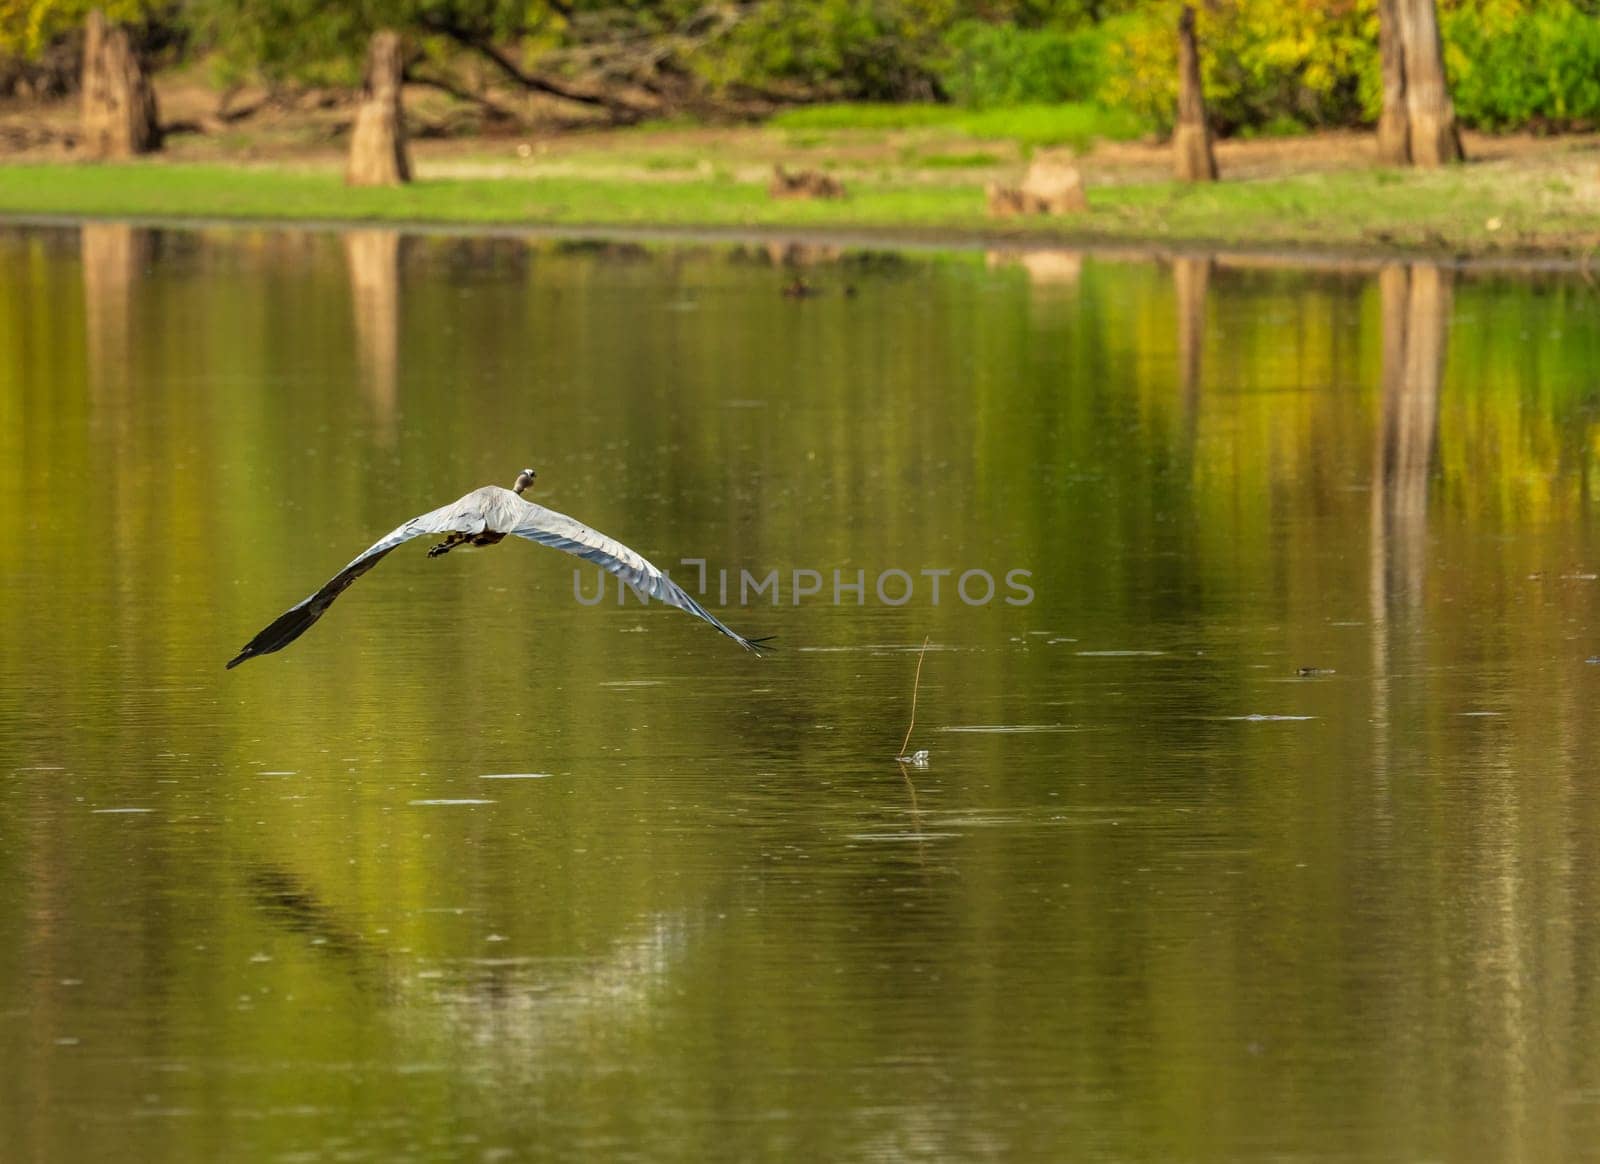 Great blue heron flying above calm water in Atchafalaya basin by steheap